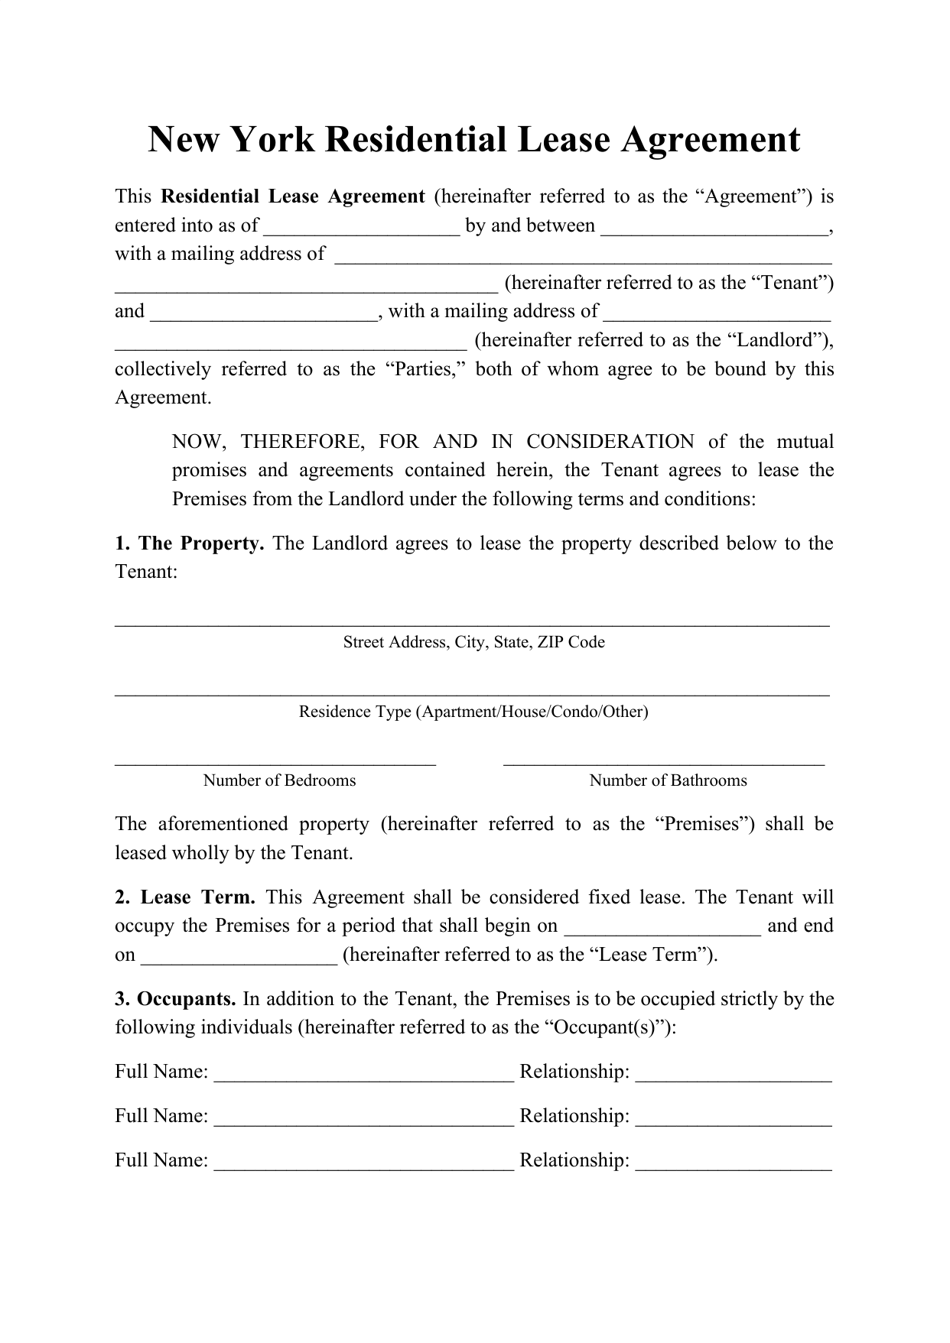 new york residential lease agreement template download printable pdf